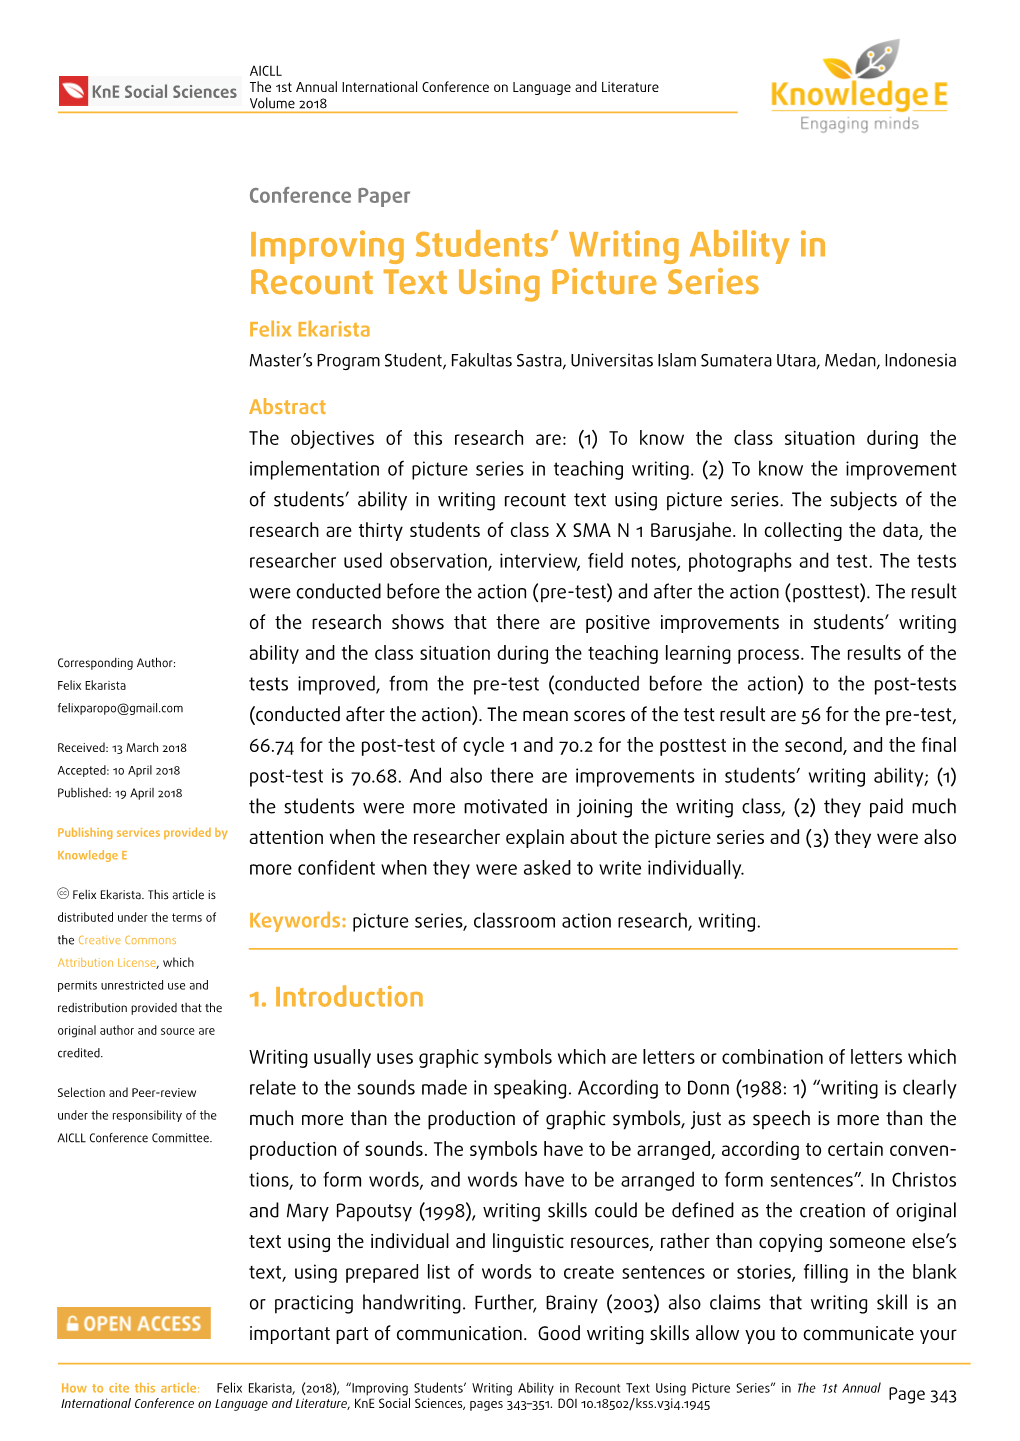 Improving Students' Writing Ability in Recount Text Using Picture Series